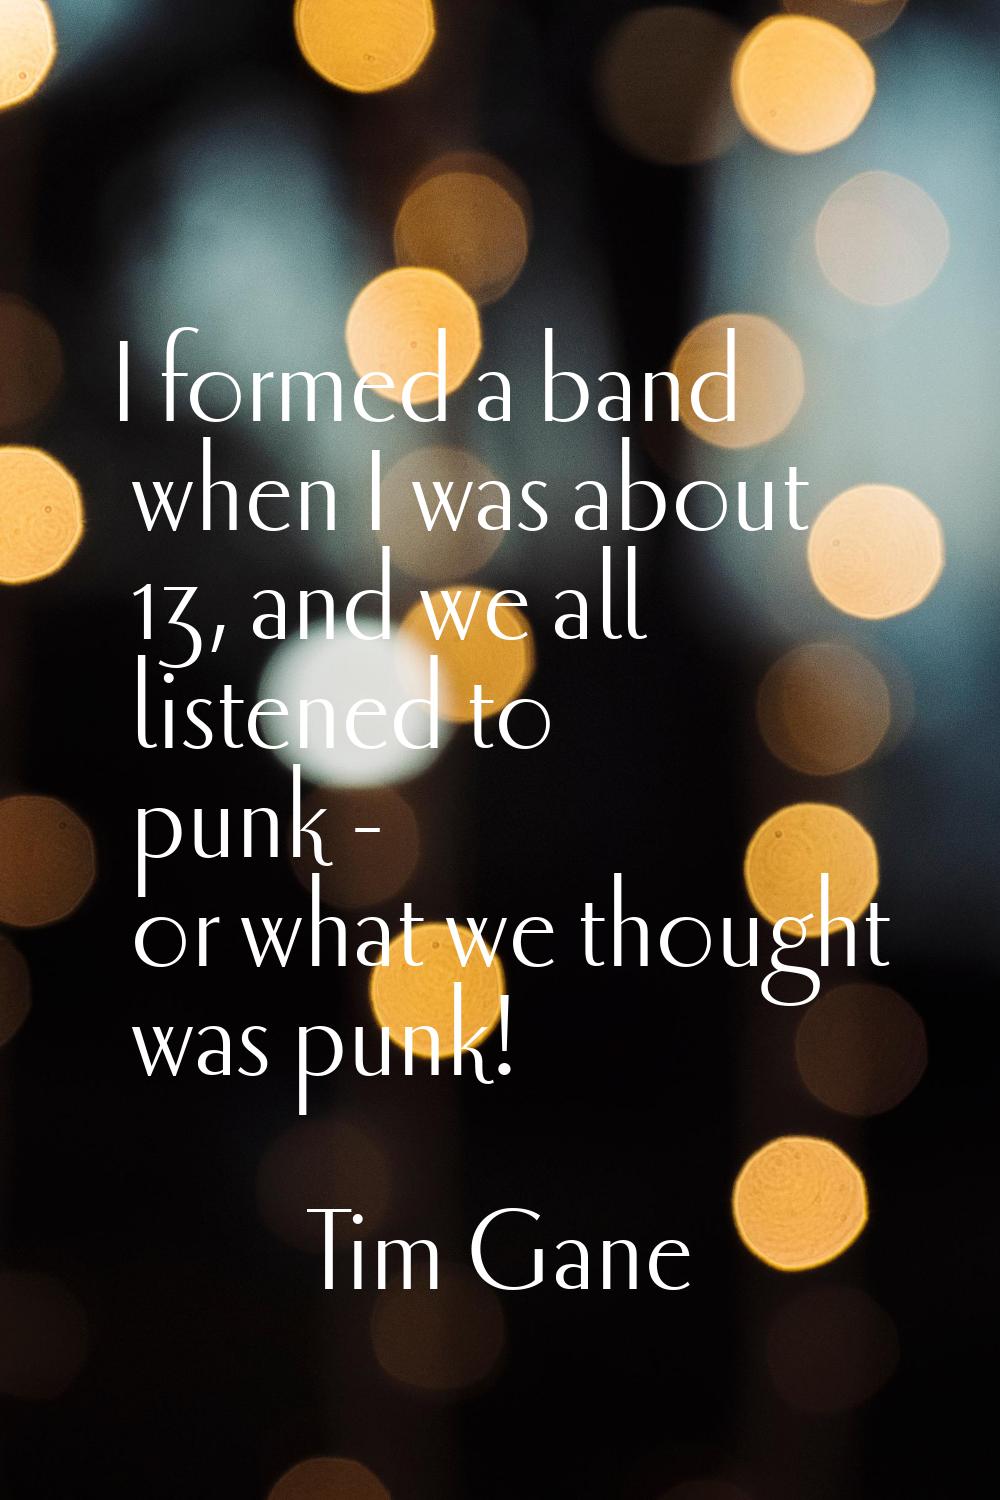 I formed a band when I was about 13, and we all listened to punk - or what we thought was punk!